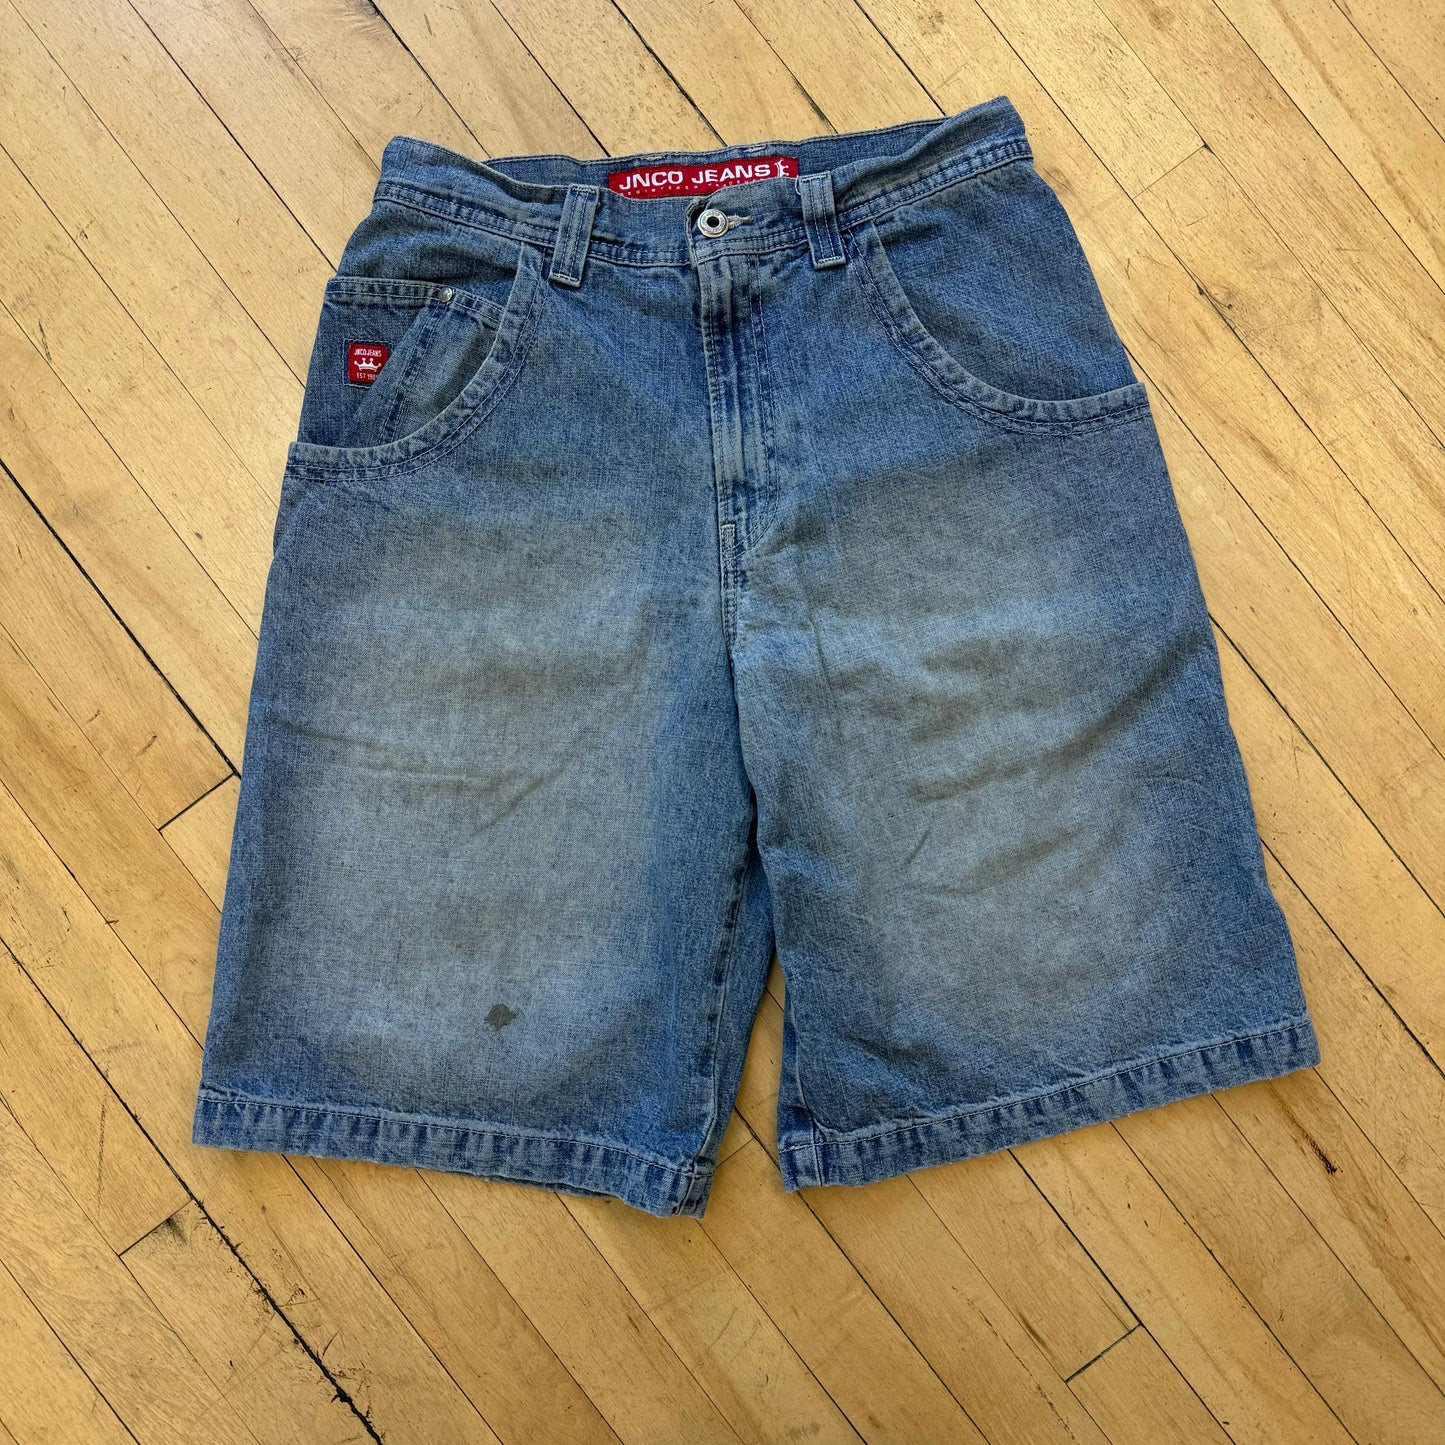 Vintage Embroidered Dragon Jnco Jean shorts Sz 31